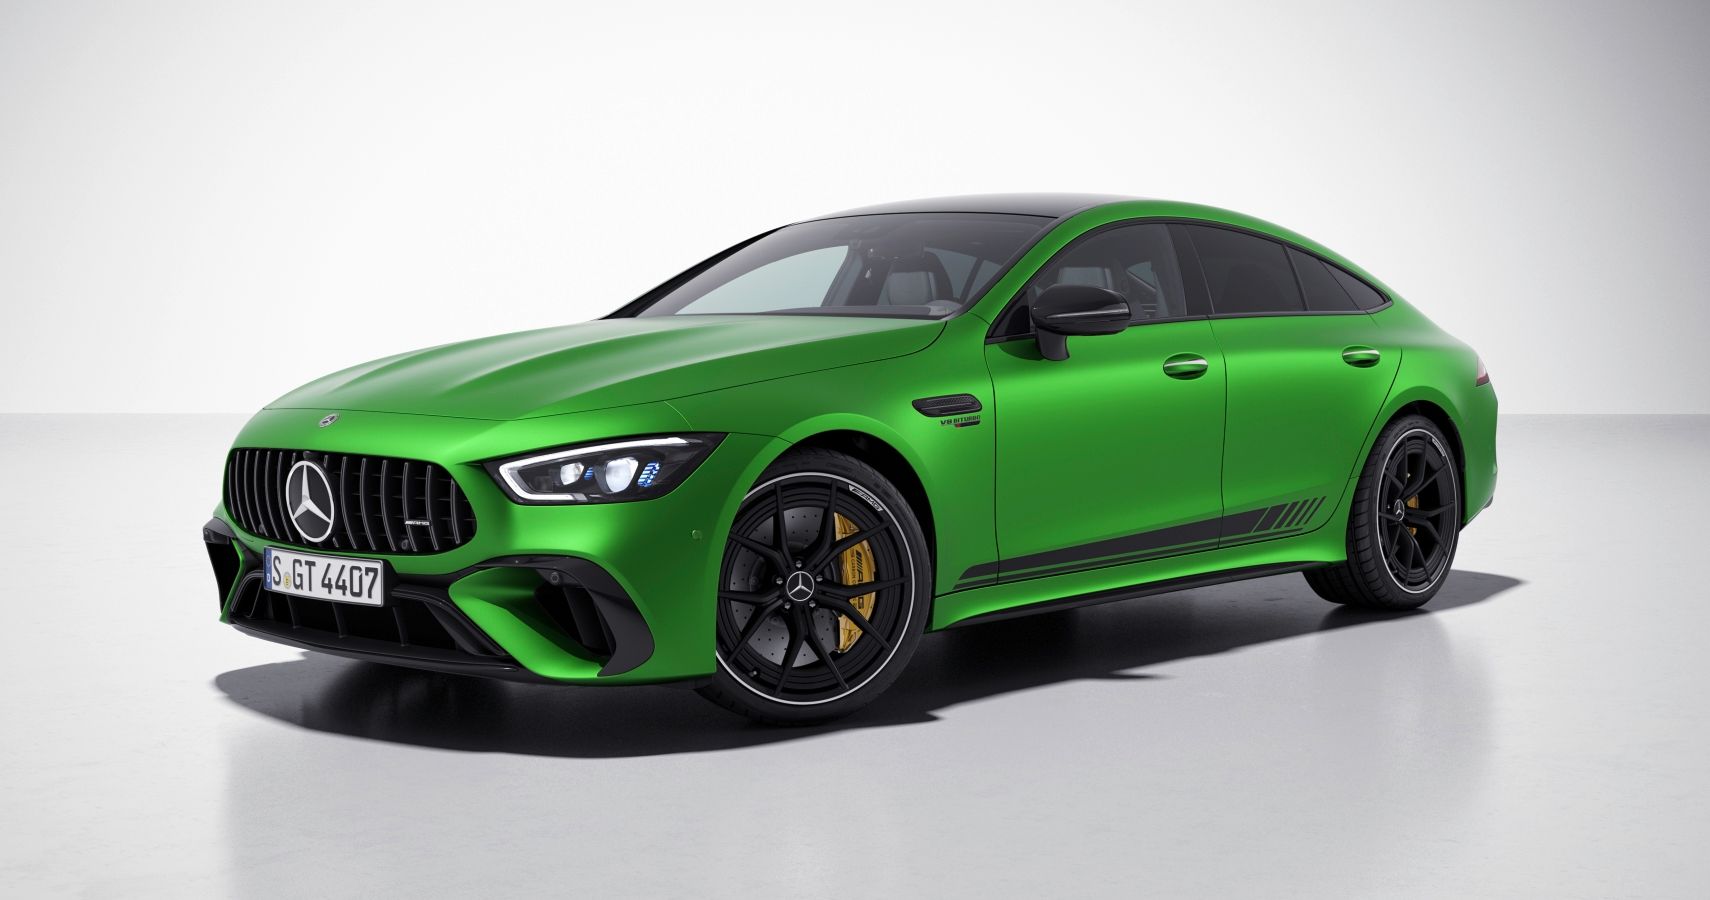 MercedesAMG GT 63 S E Performance Gets 'Green Hell Magno' Special